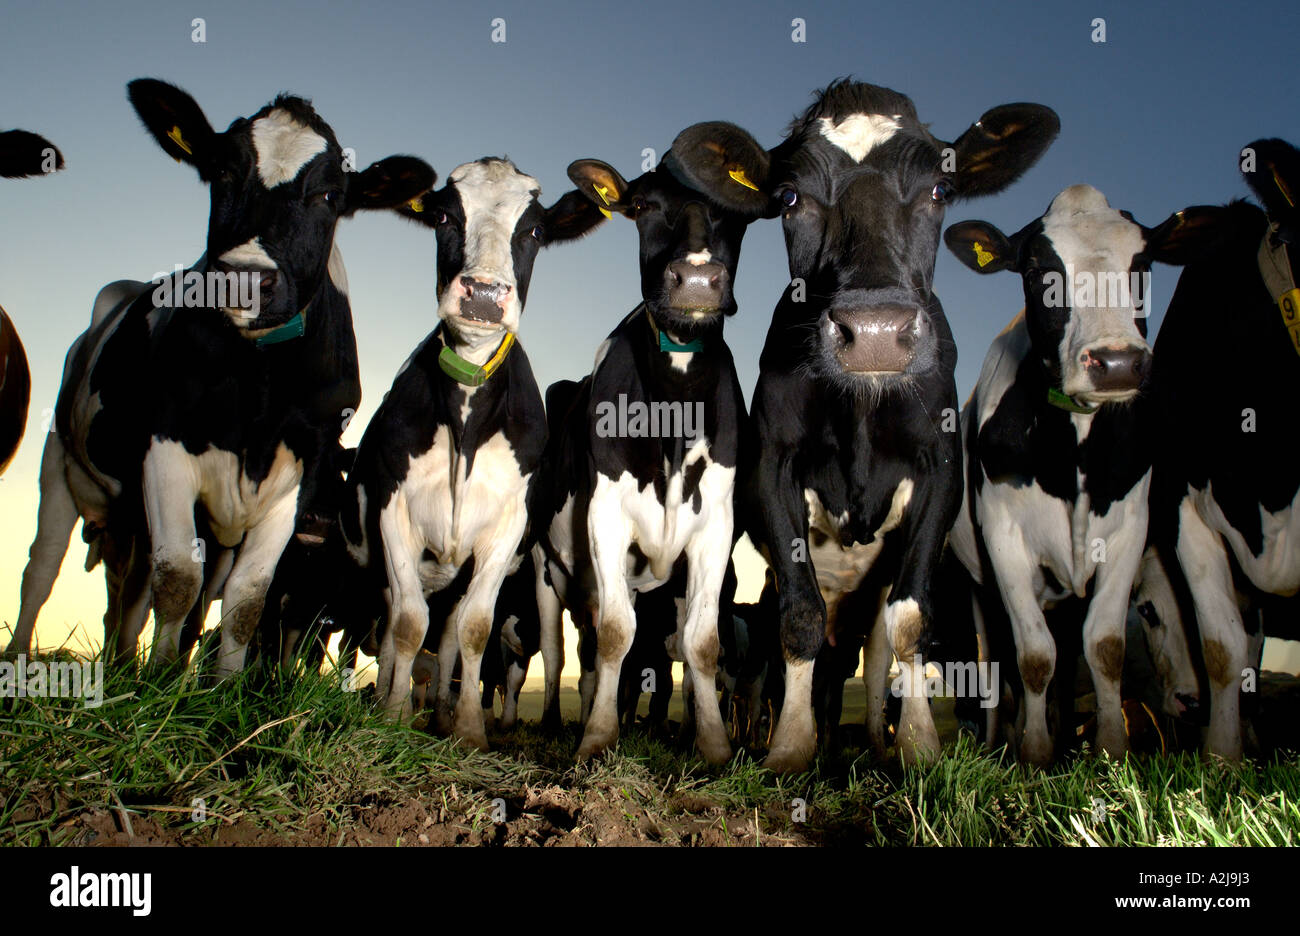 A herd of Holstein Friesan dairy cows in field Stock Photo